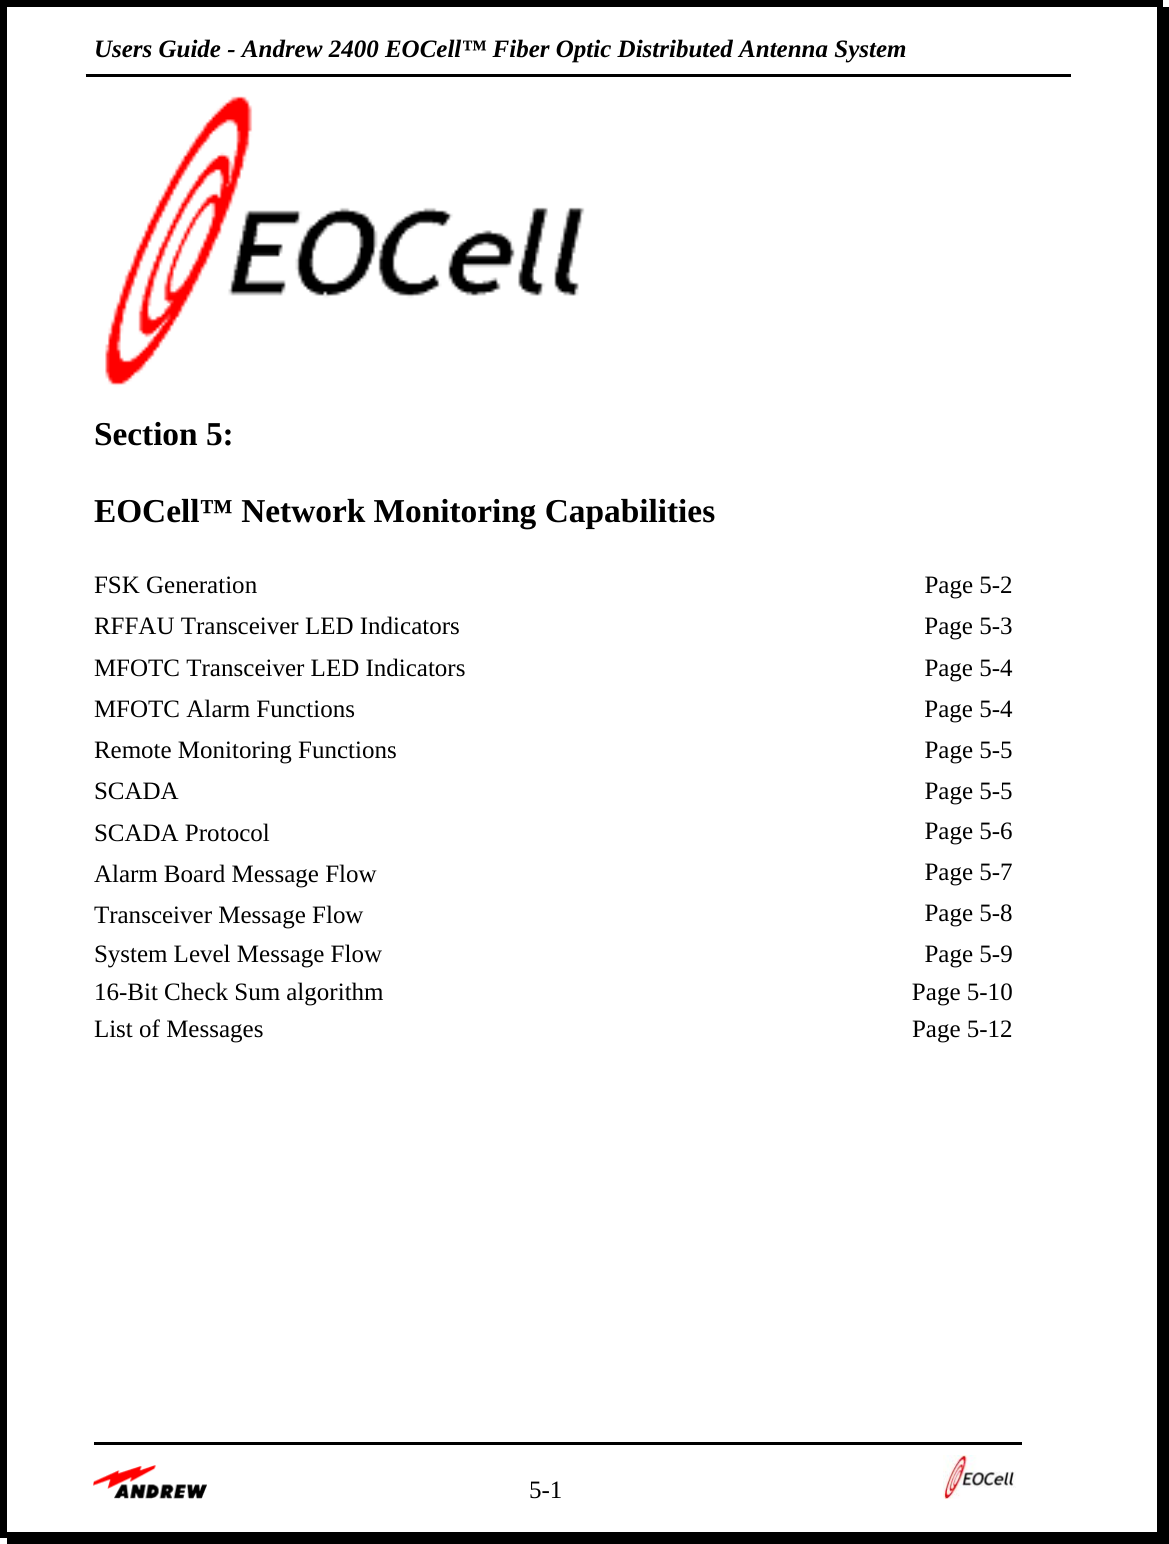 Users Guide - Andrew 2400 EOCell™ Fiber Optic Distributed Antenna System    5-1     Section 5:   EOCell™ Network Monitoring Capabilities  FSK Generation    Page 5-2 RFFAU Transceiver LED Indicators  Page 5-3 MFOTC Transceiver LED Indicators    Page 5-4 MFOTC Alarm Functions    Page 5-4 Remote Monitoring Functions    Page 5-5 SCADA  Page 5-5 SCADA Protocol   Page 5-6 Alarm Board Message Flow   Page 5-7 Transceiver Message Flow   Page 5-8 System Level Message Flow    Page 5-9 16-Bit Check Sum algorithm    Page 5-10 List of Messages    Page 5-12         